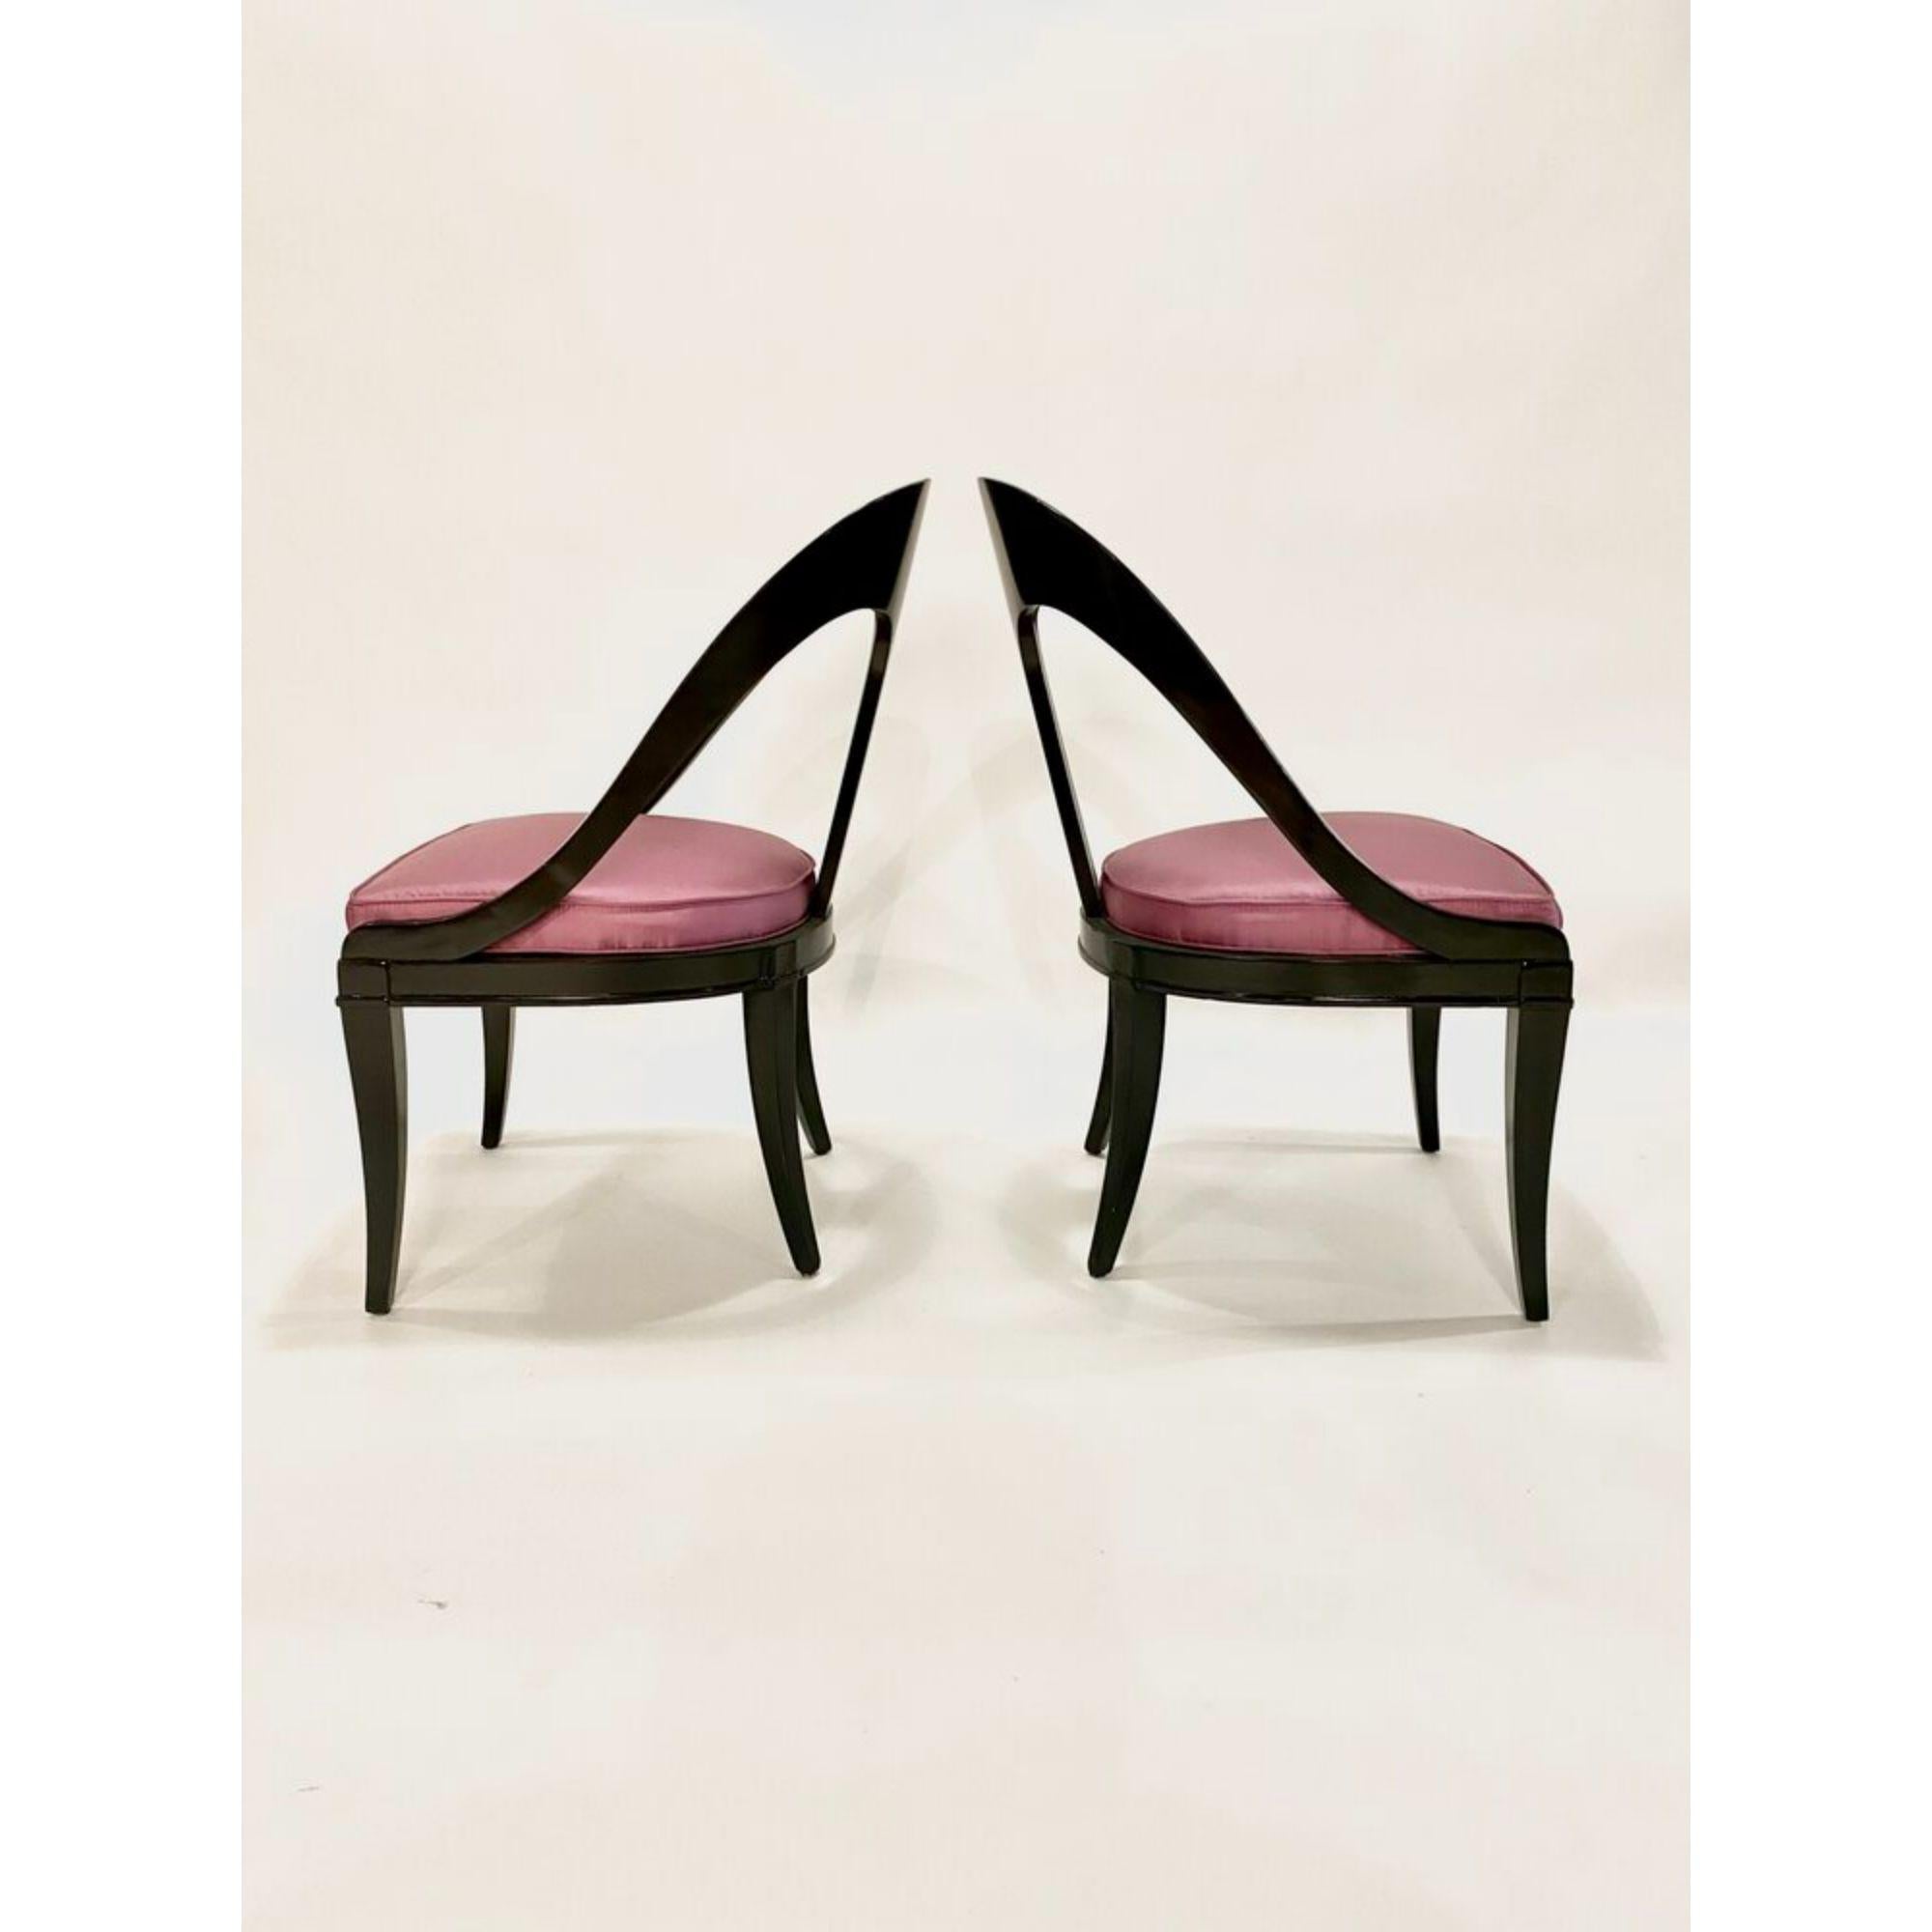 Pair of mid-century neoclassic design spoon chairs in the style of Michael Taylor with black lacquered wood frame and violet silk upholstered seats.

